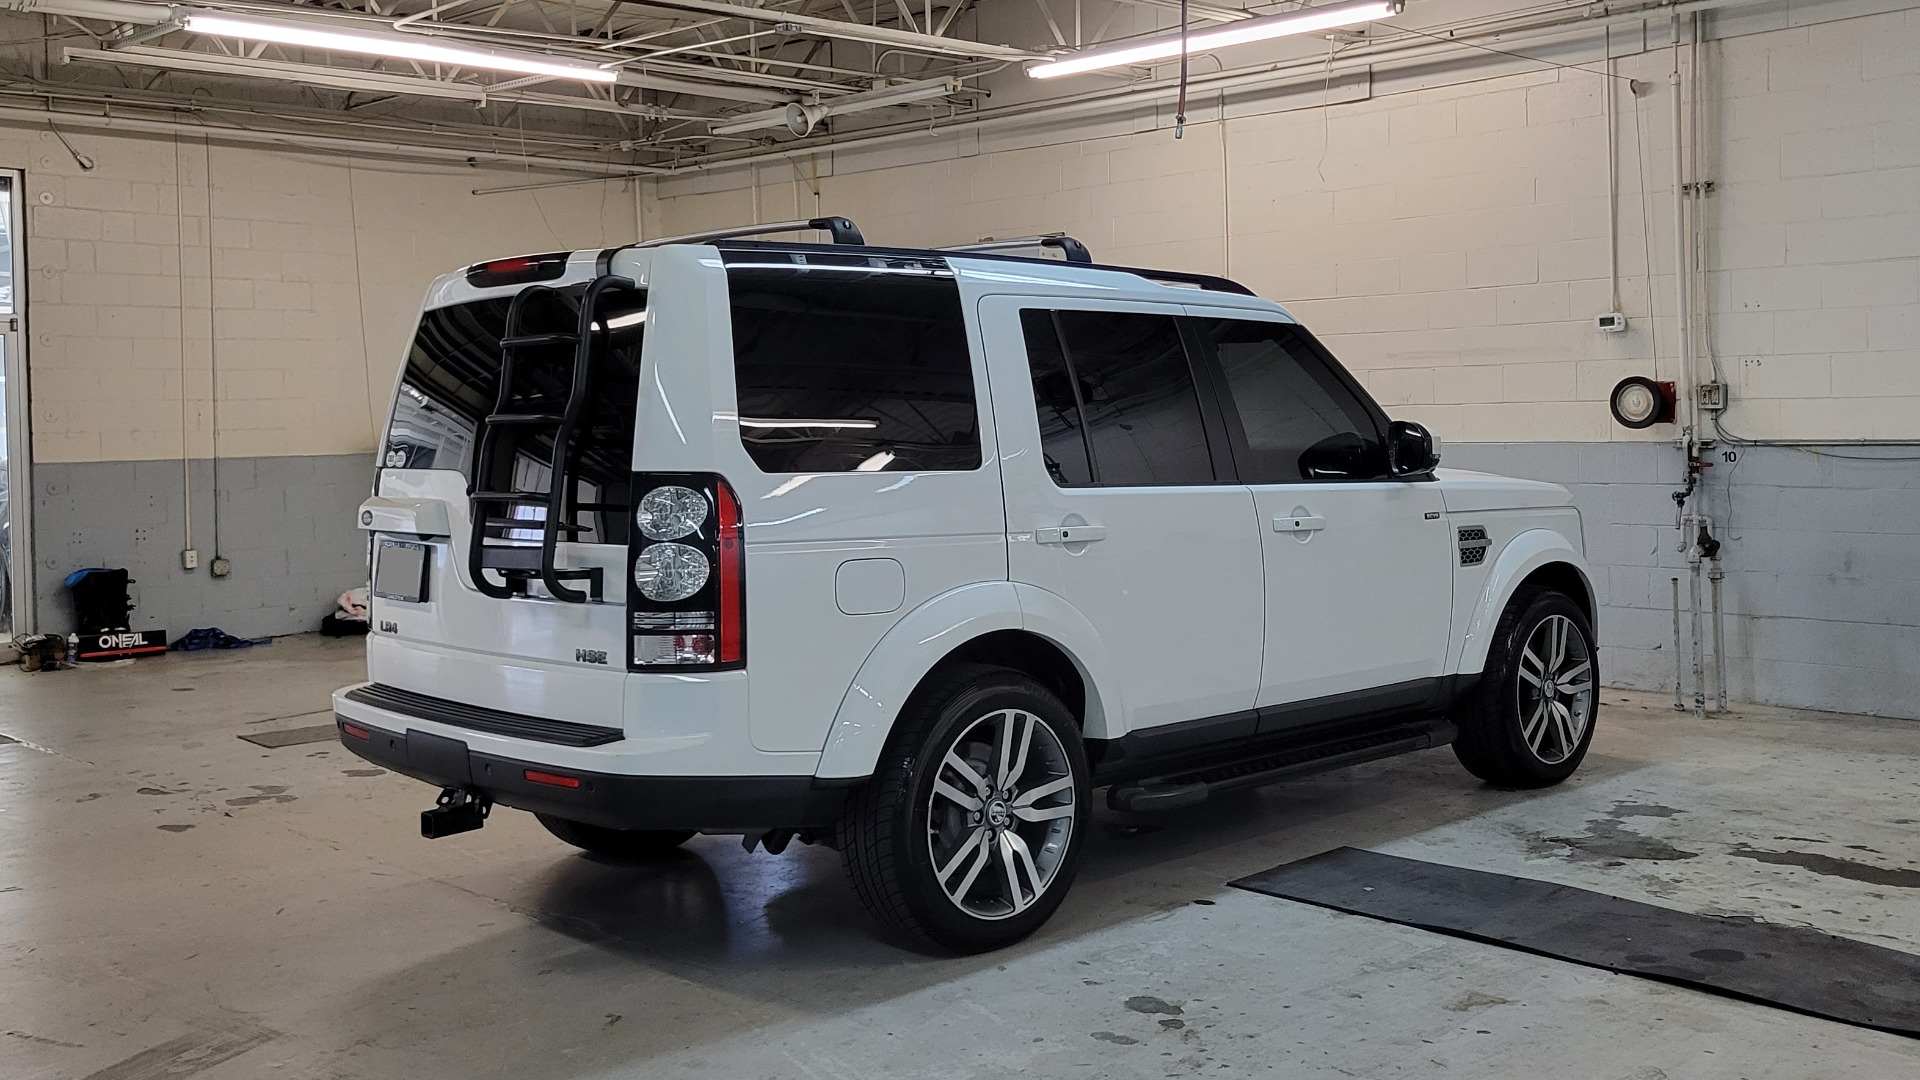 Used 2014 Land Rover LR4 HSE LUX / NAV / SUNROOF / 3-ROW / MERIDIAN / VISION ASST for sale $35,995 at Formula Imports in Charlotte NC 28227 92